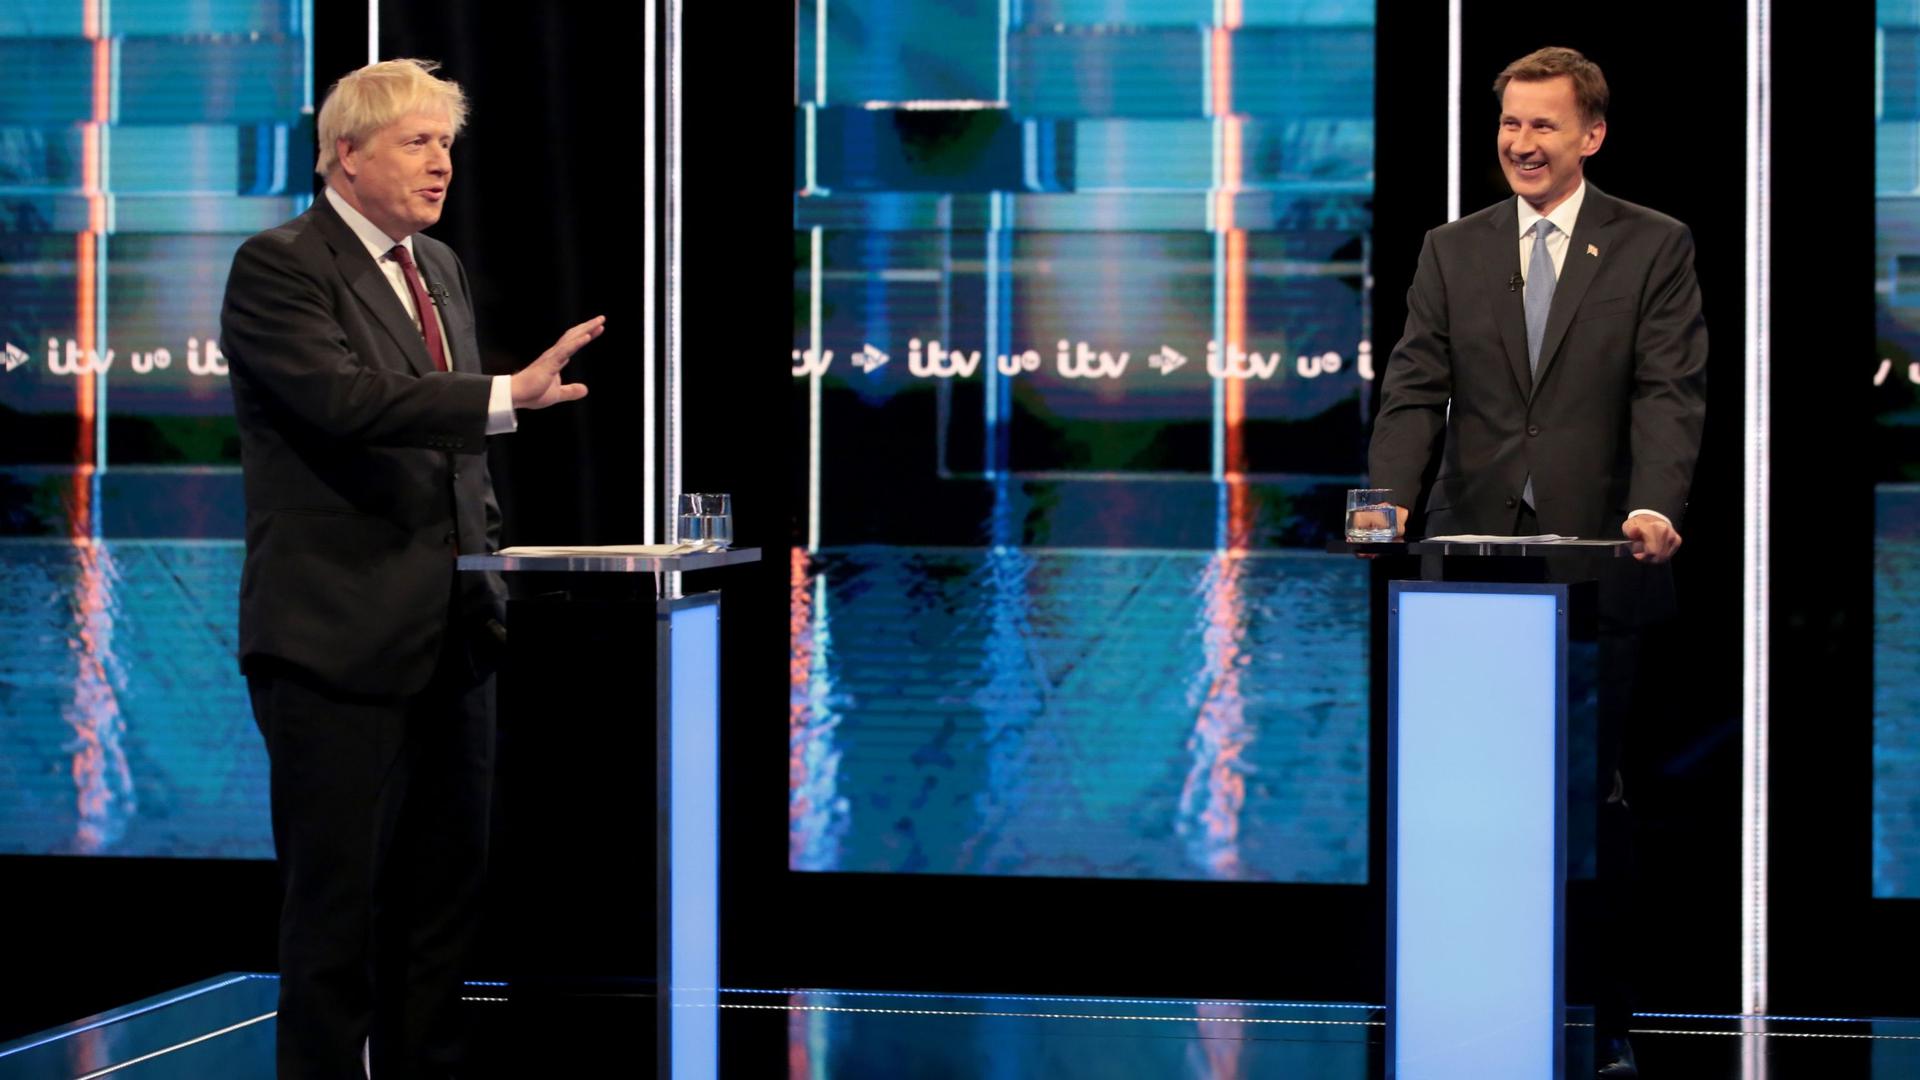 Conservative leadership contenders Boris Johnson and Foreign secretary Jeremy Hunt (R) take part in Britain's Next Prime Minister: The ITV Debate in Manchester on July 9, 2019. (Photo by Matt Frost / ITV / AFP) / RESTRICTED TO EDITORIAL USE - MANDATORY CREDIT "AFP PHOTO / ITV / MATT FROST " - NO MARKETING NO ADVERTISING CAMPAIGNS - DISTRIBUTED AS A SERVICE TO CLIENTS --- NO ARCHIVE ---